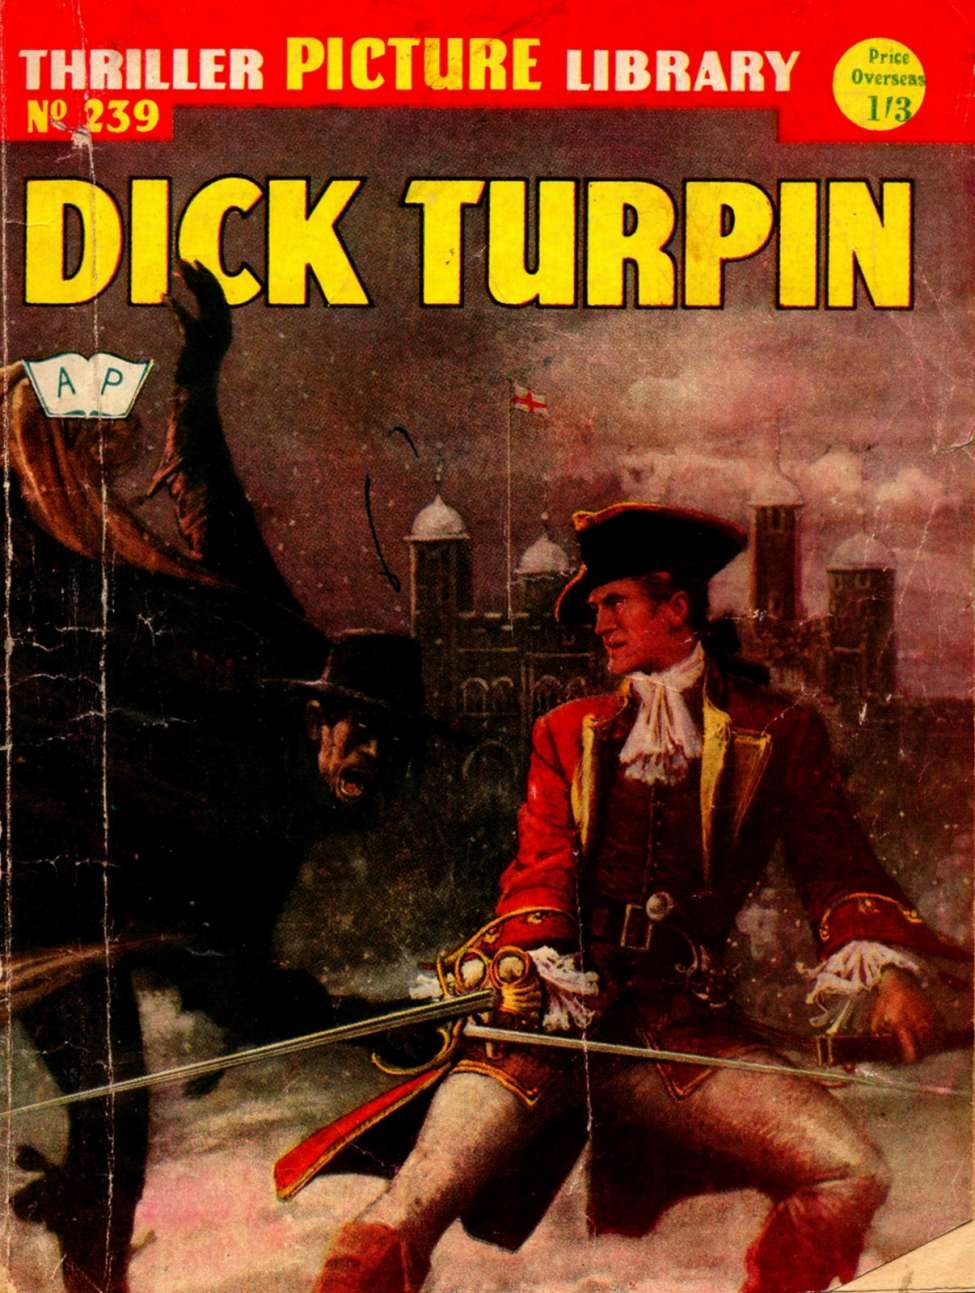 Book Cover For Thriller Picture Library 239 - Dick Turpin and Creepy Crawley